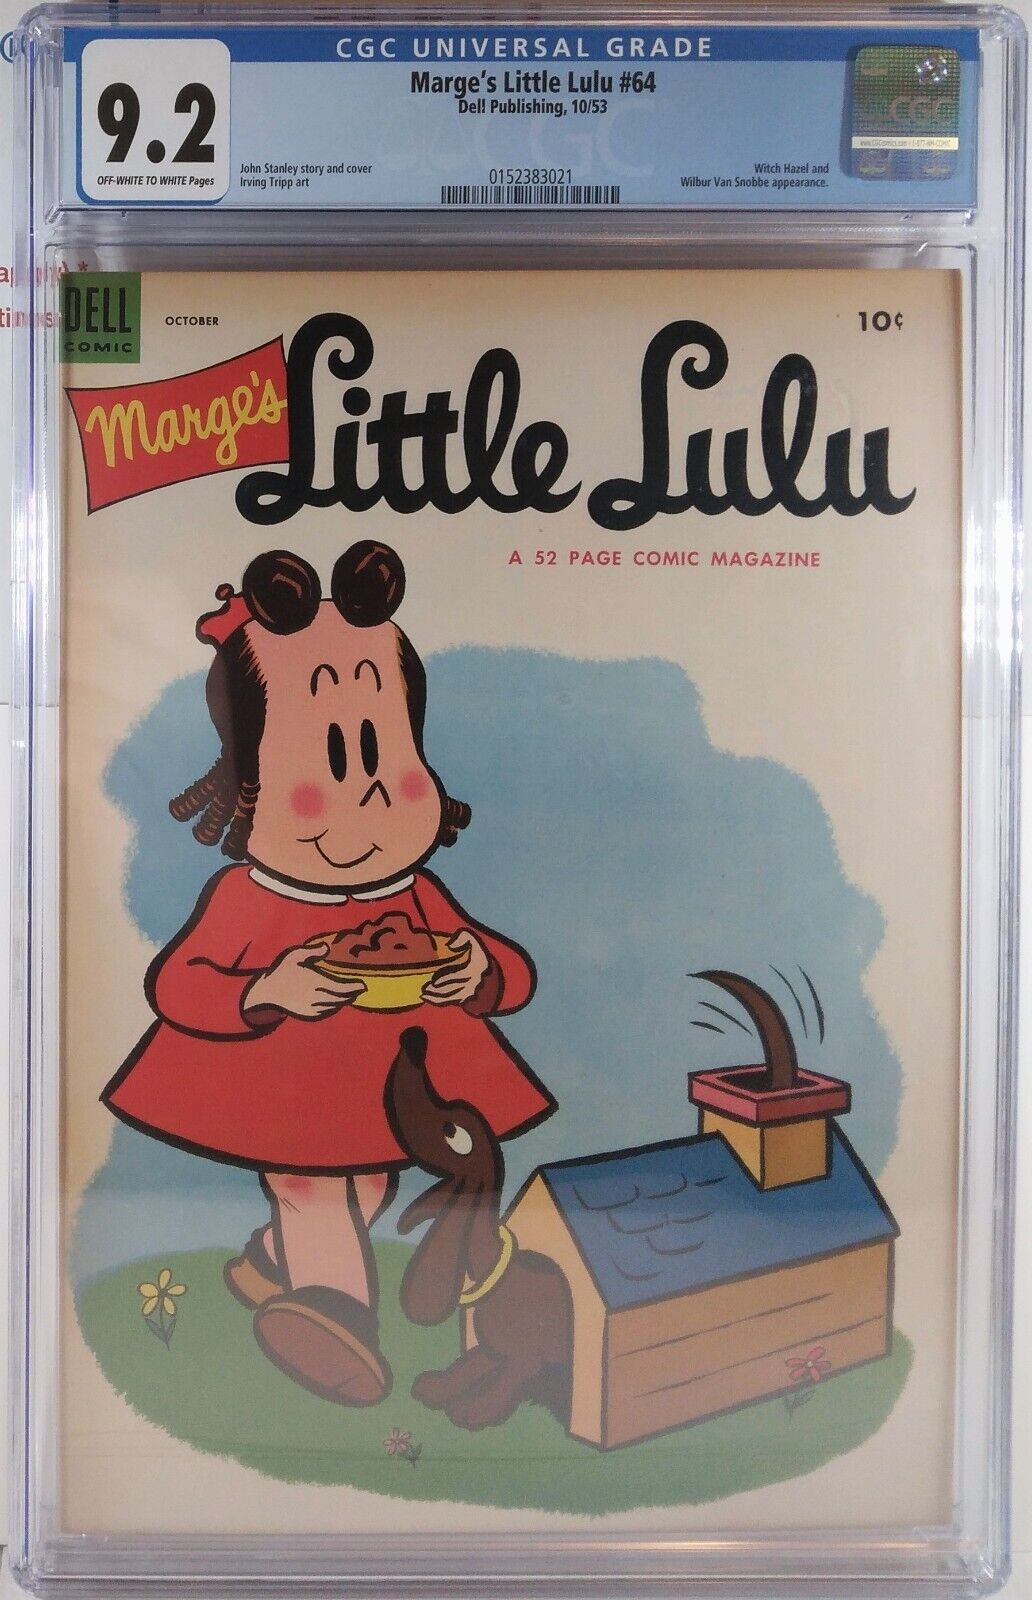 💥 CGC 9.2 NM- MARGE'S LITTLE LULU #64 DELL PUBLISHING 1953 GOLDEN AGE SCARCE